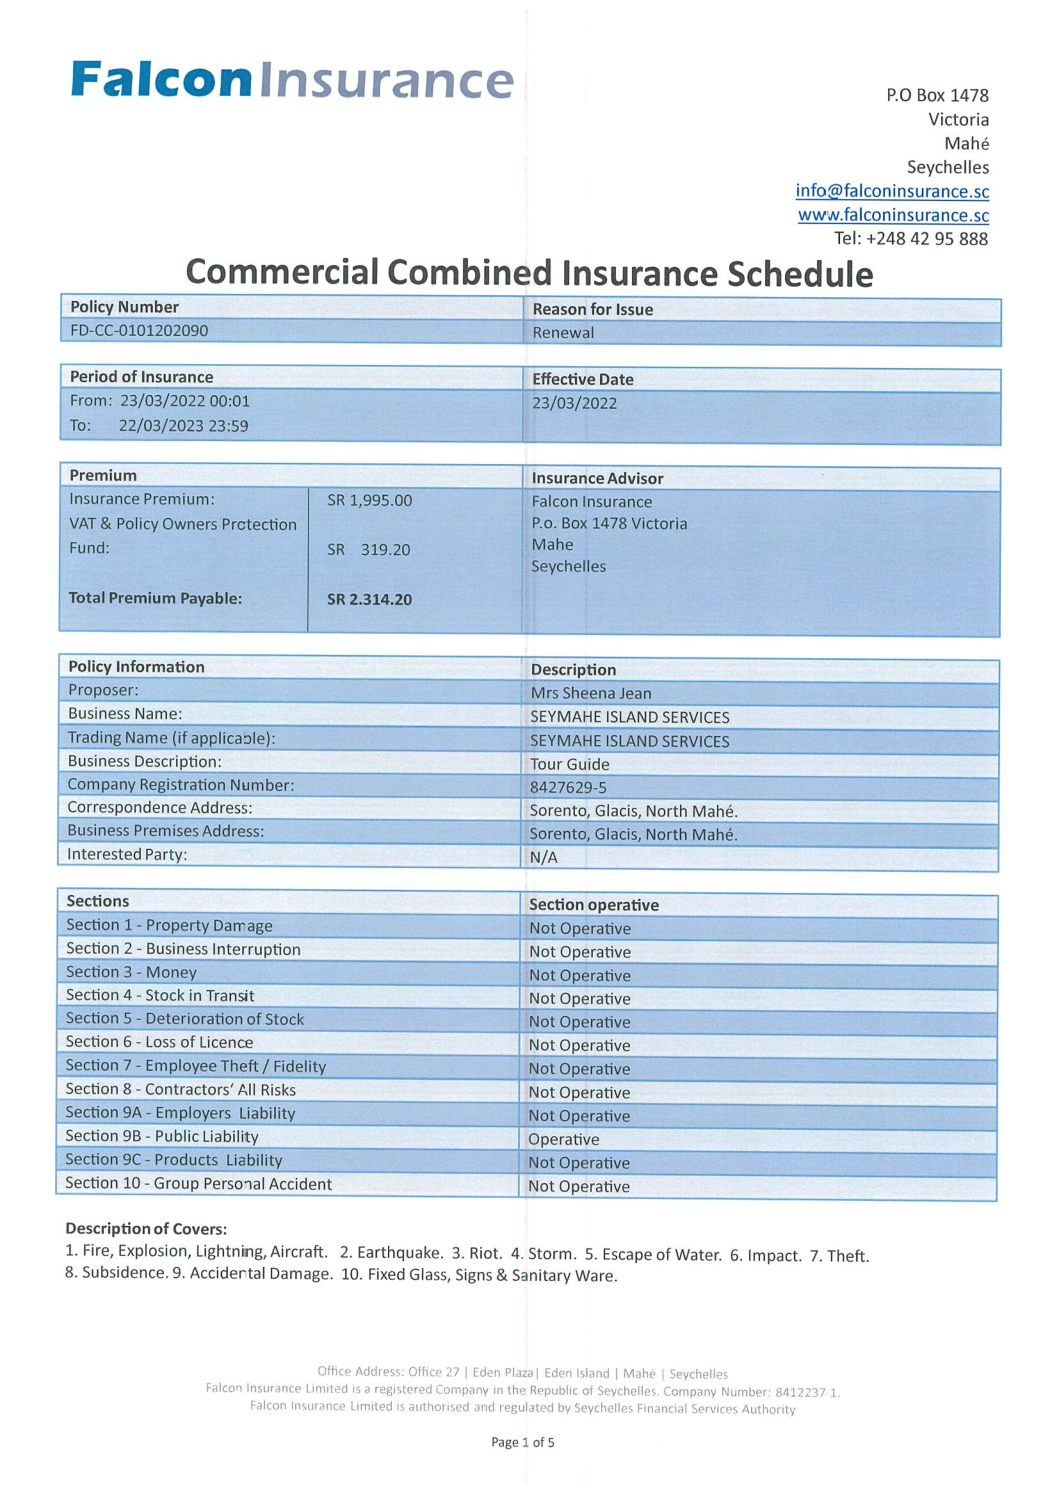 Commercial Combined Policy Schedule SEYMAHE ISLAND SERVICES 2022 pdf